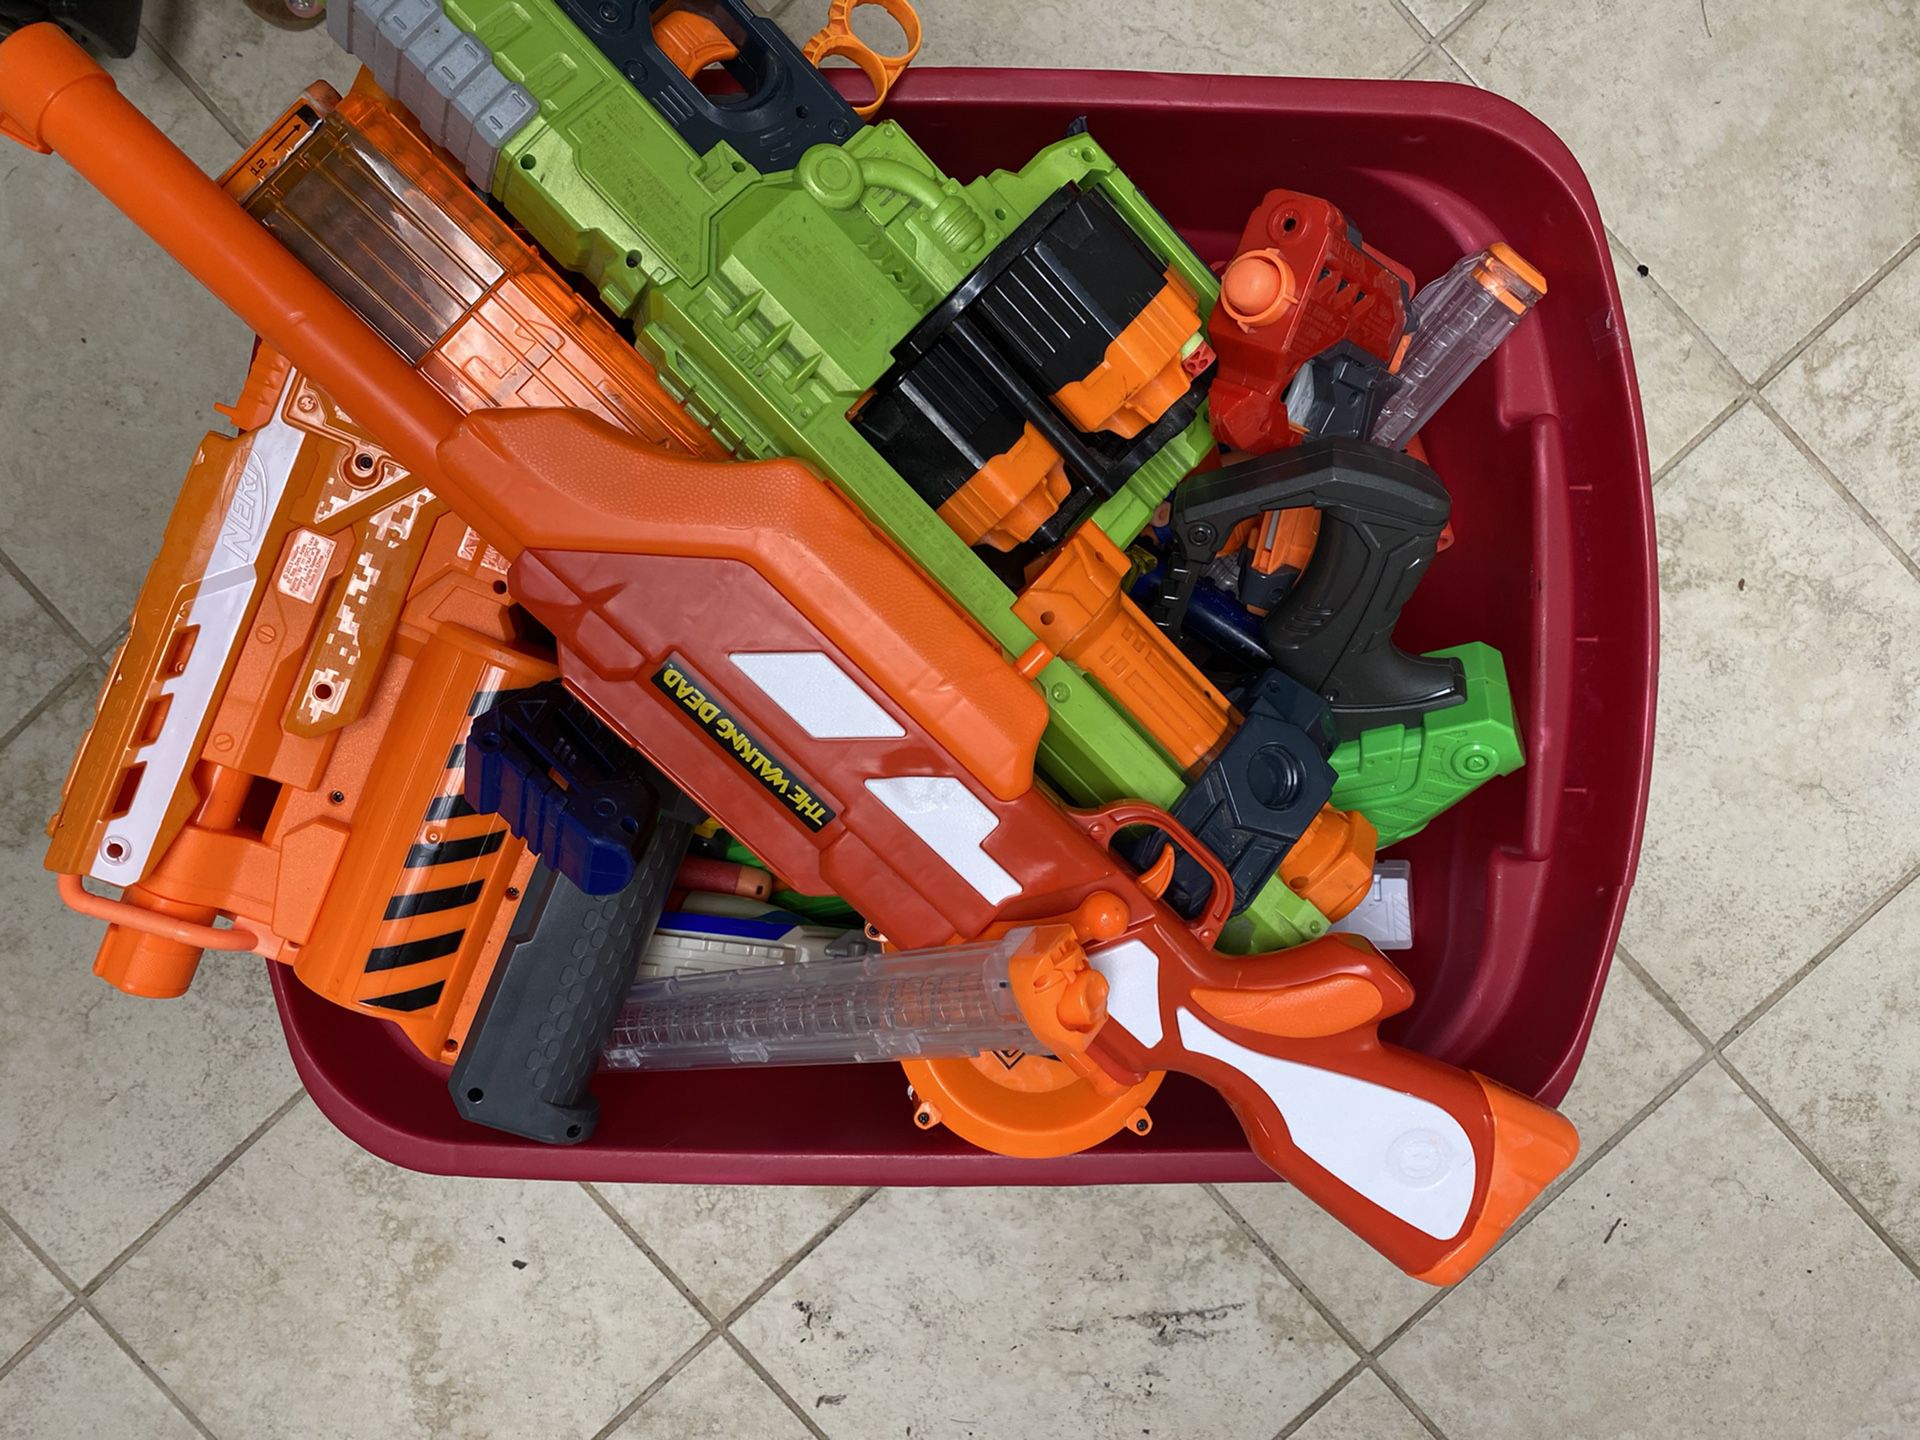 Tub of nerf guns and bullets